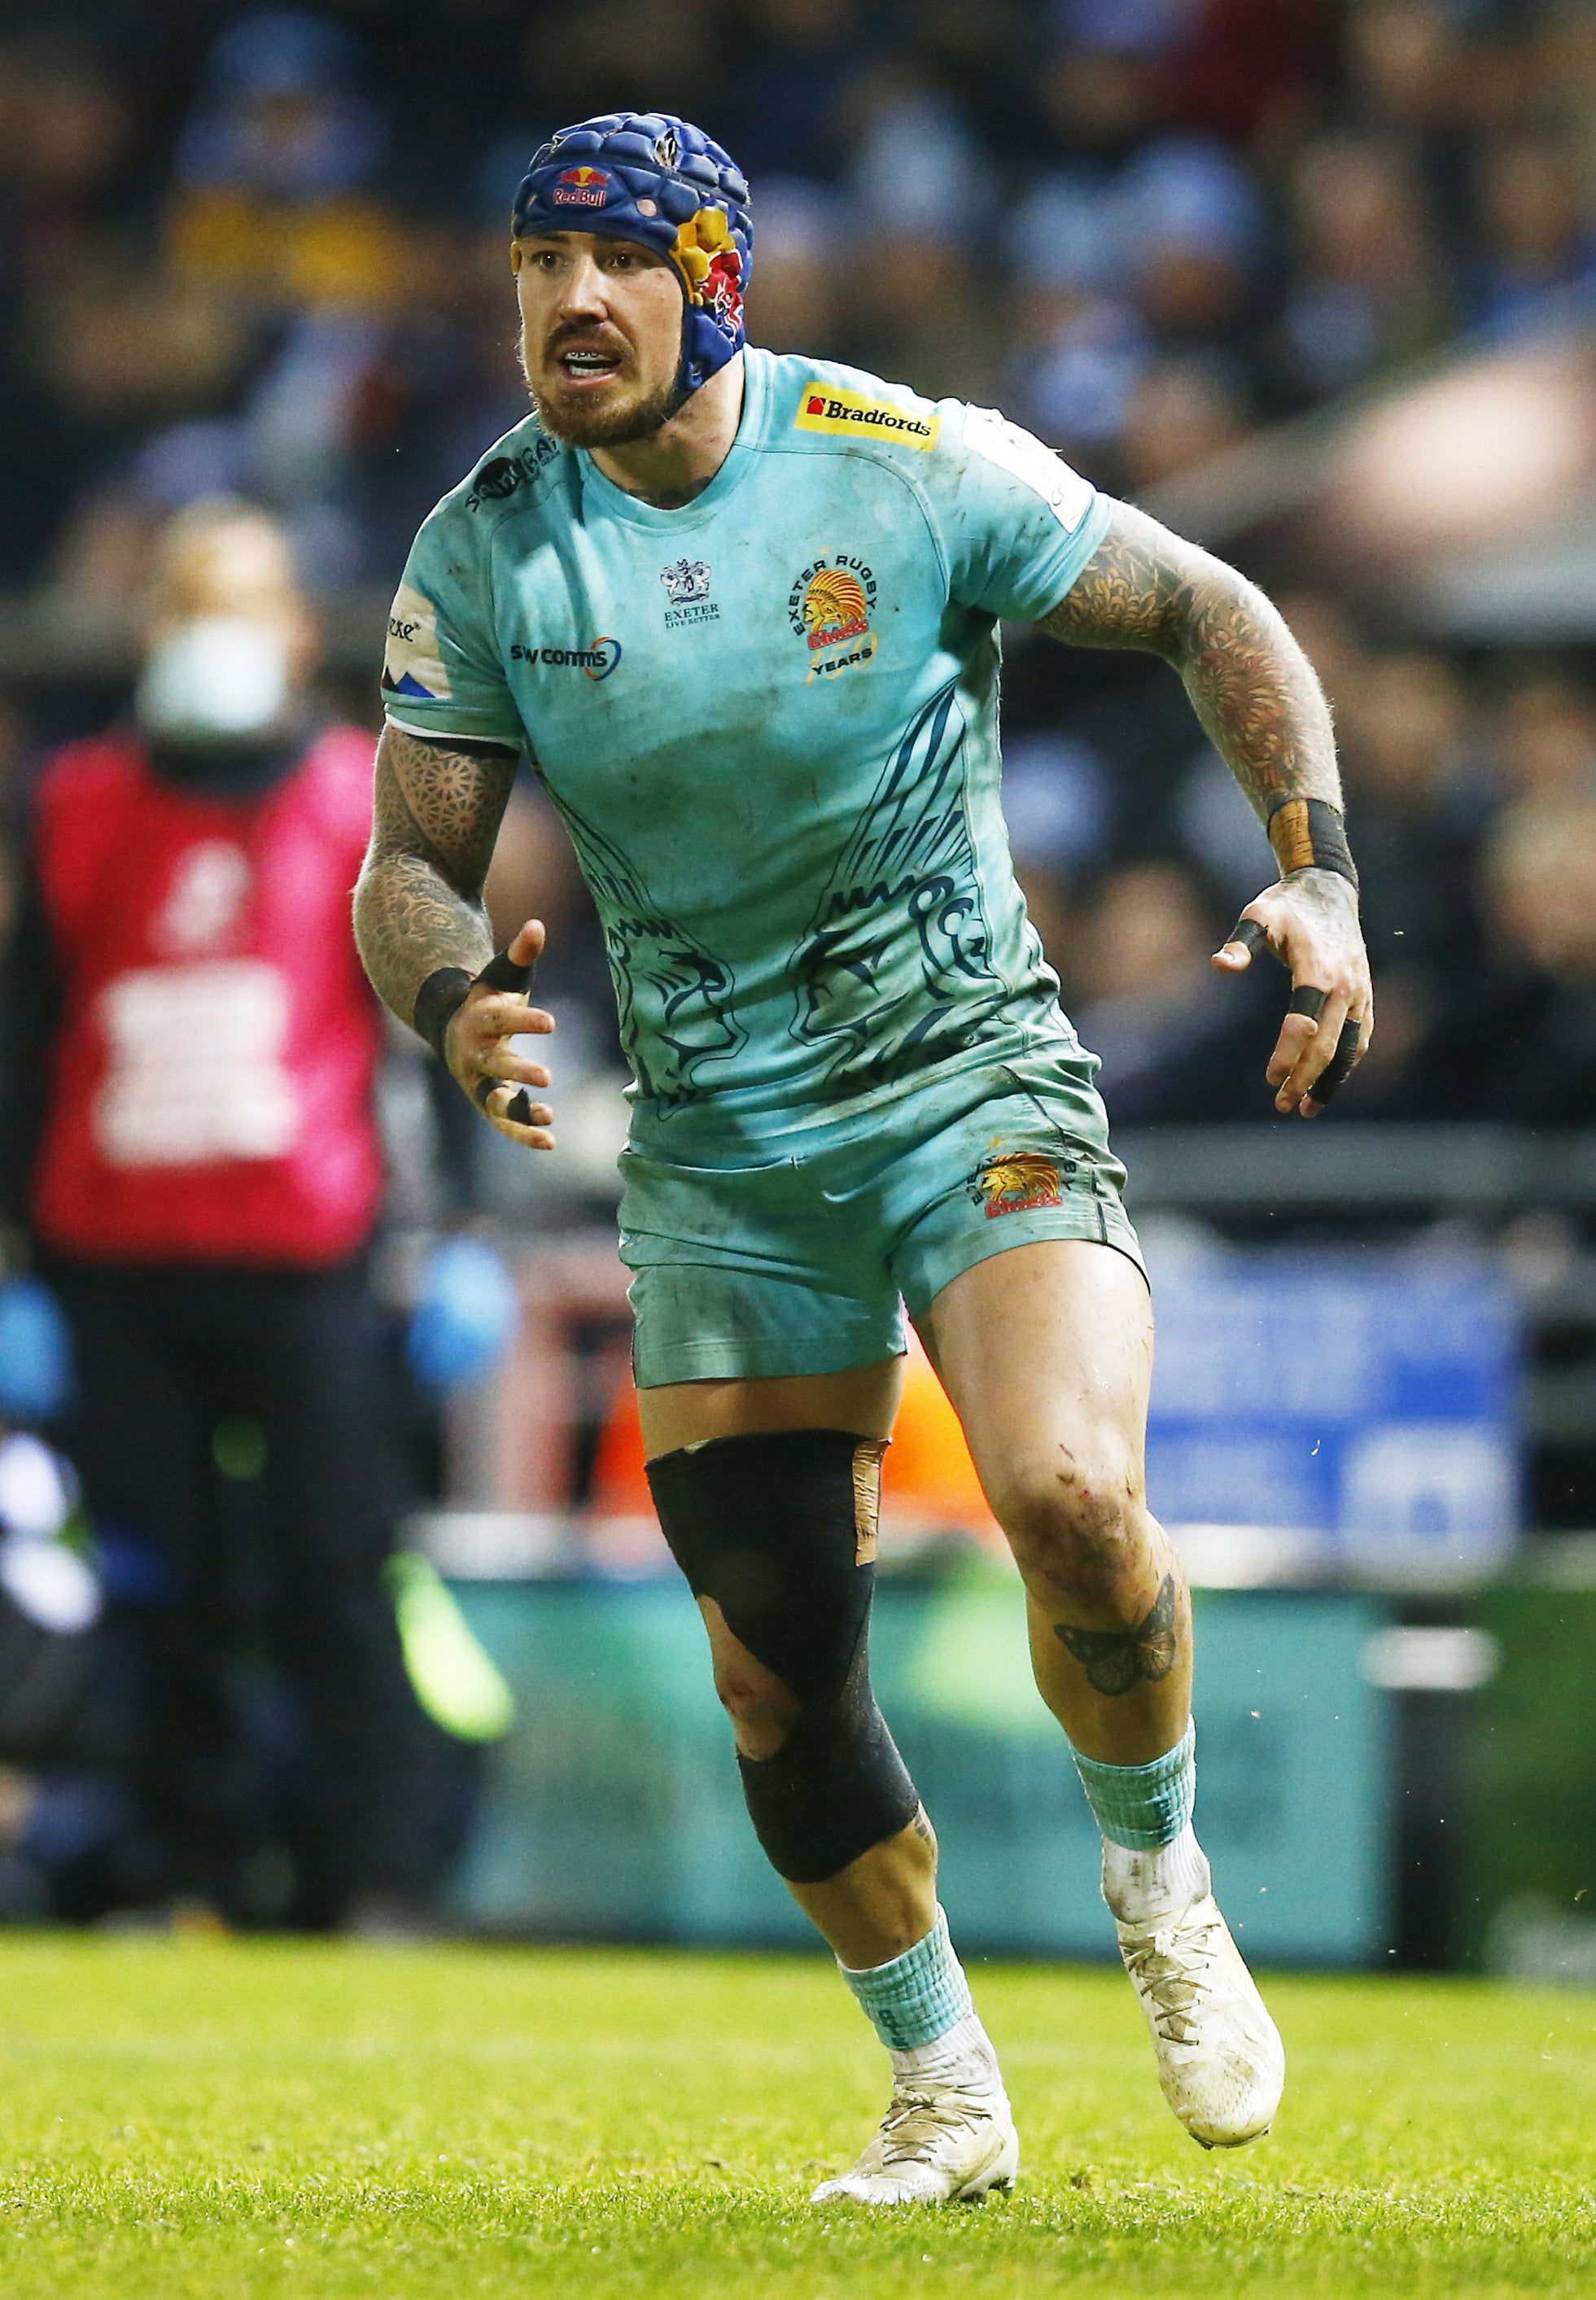 Exeter and England wing Jack Nowell has shown signs of getting back to top form (Steve Haag/PA).